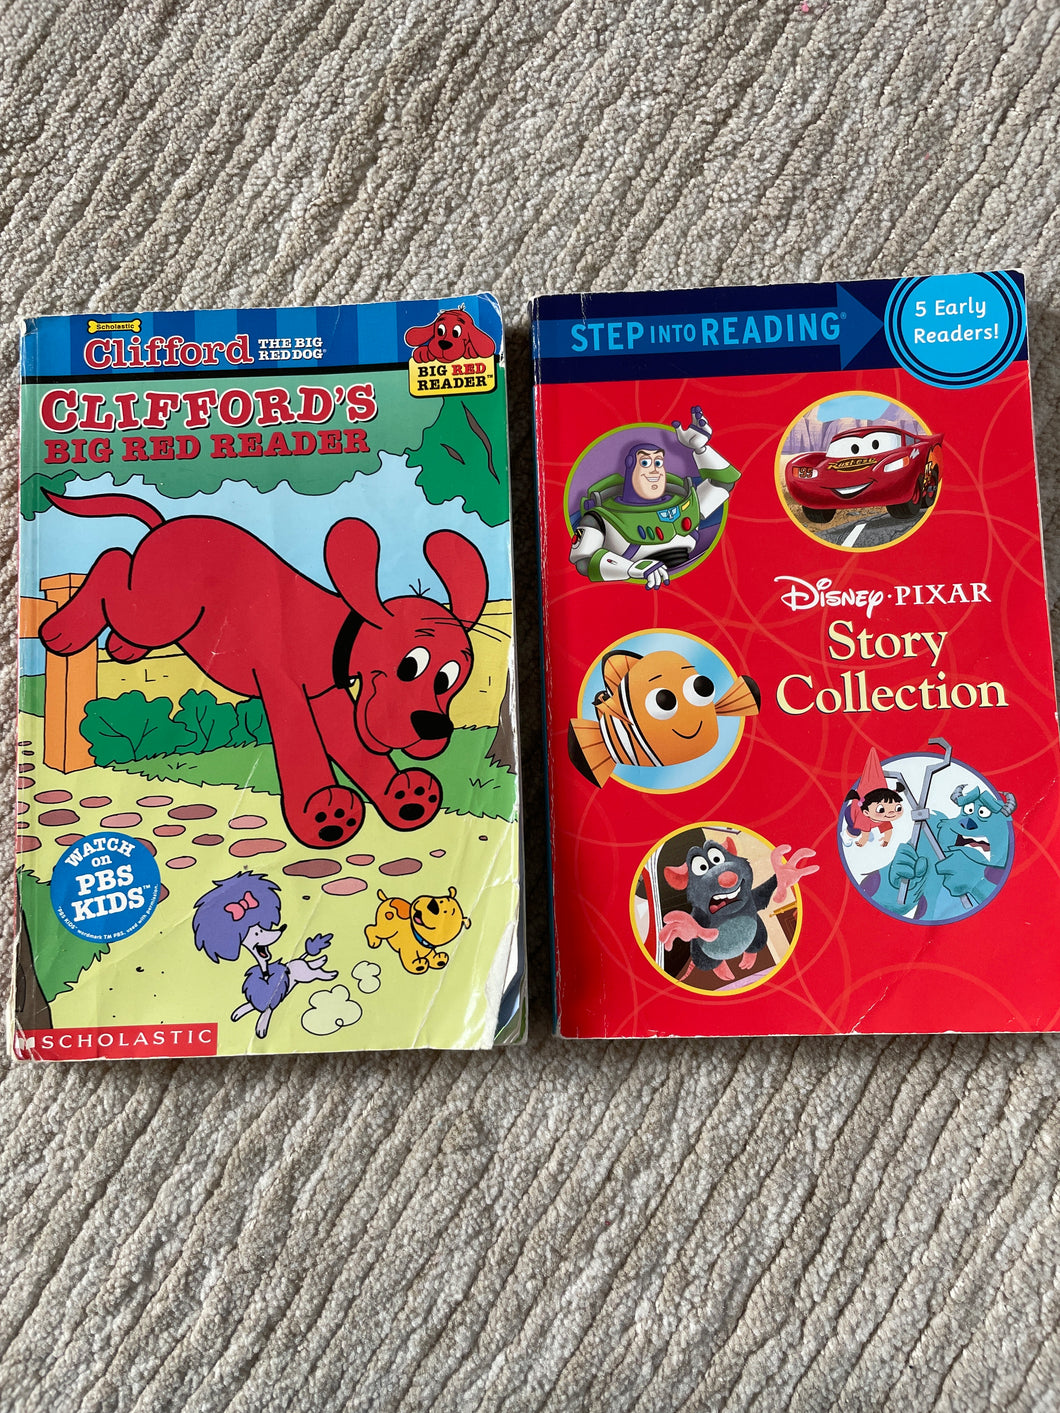 Step into reading five early readers in one set of two books Clifford and Disney Pixar